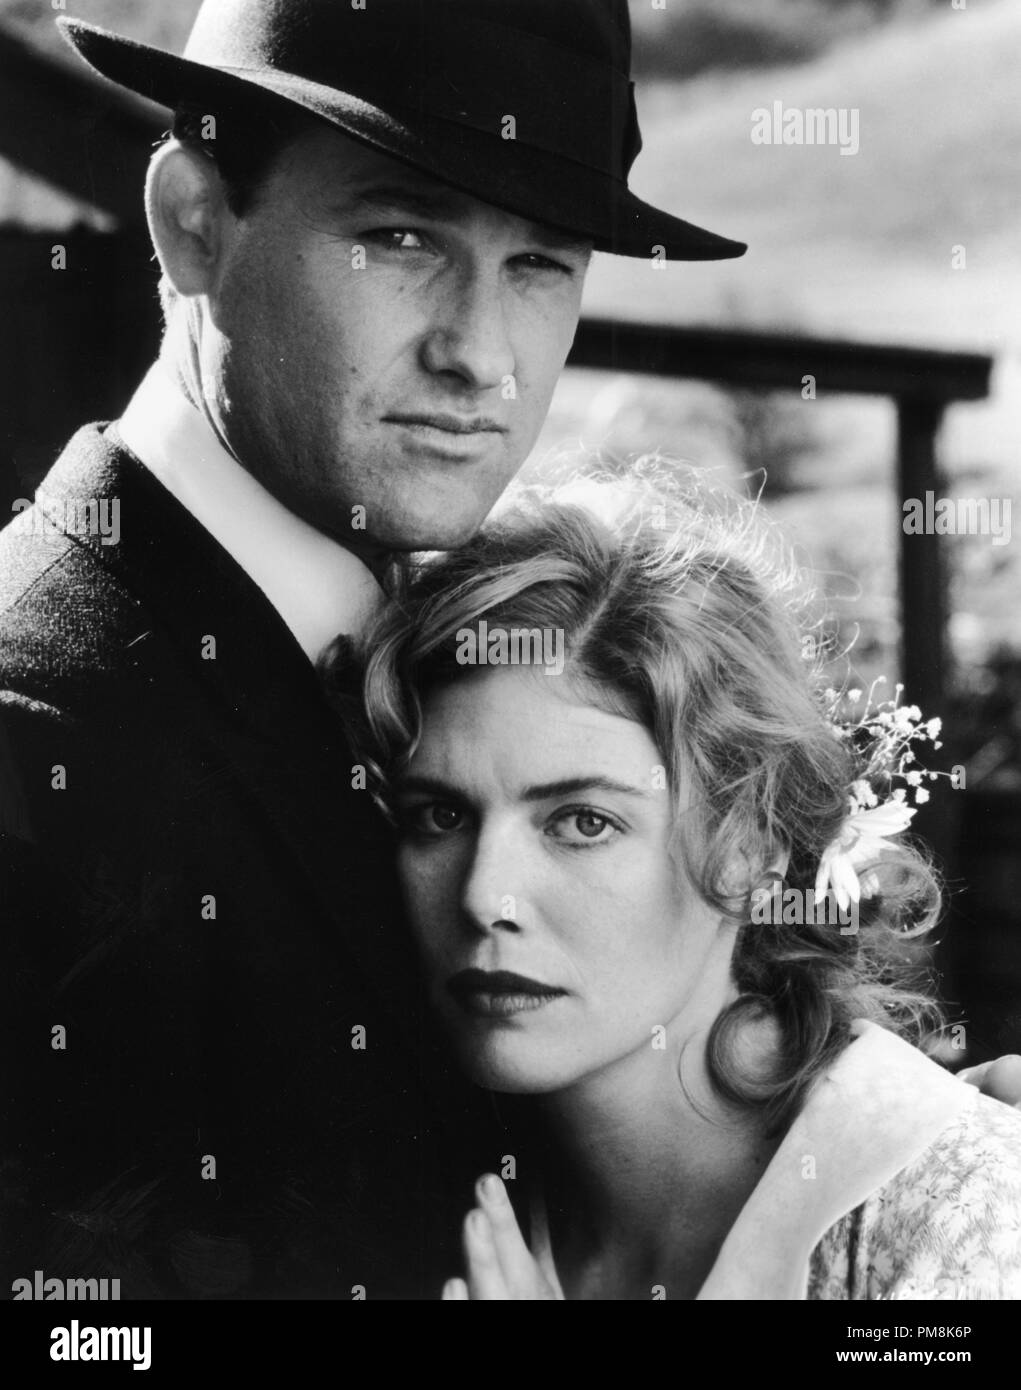 Film still or Publicity still from 'Winter People' Kurt Russel and Kelly McGillis © 1989 Columbia All Rights Reserved   File Reference # 31623012THA  For Editorial Use Only Stock Photo